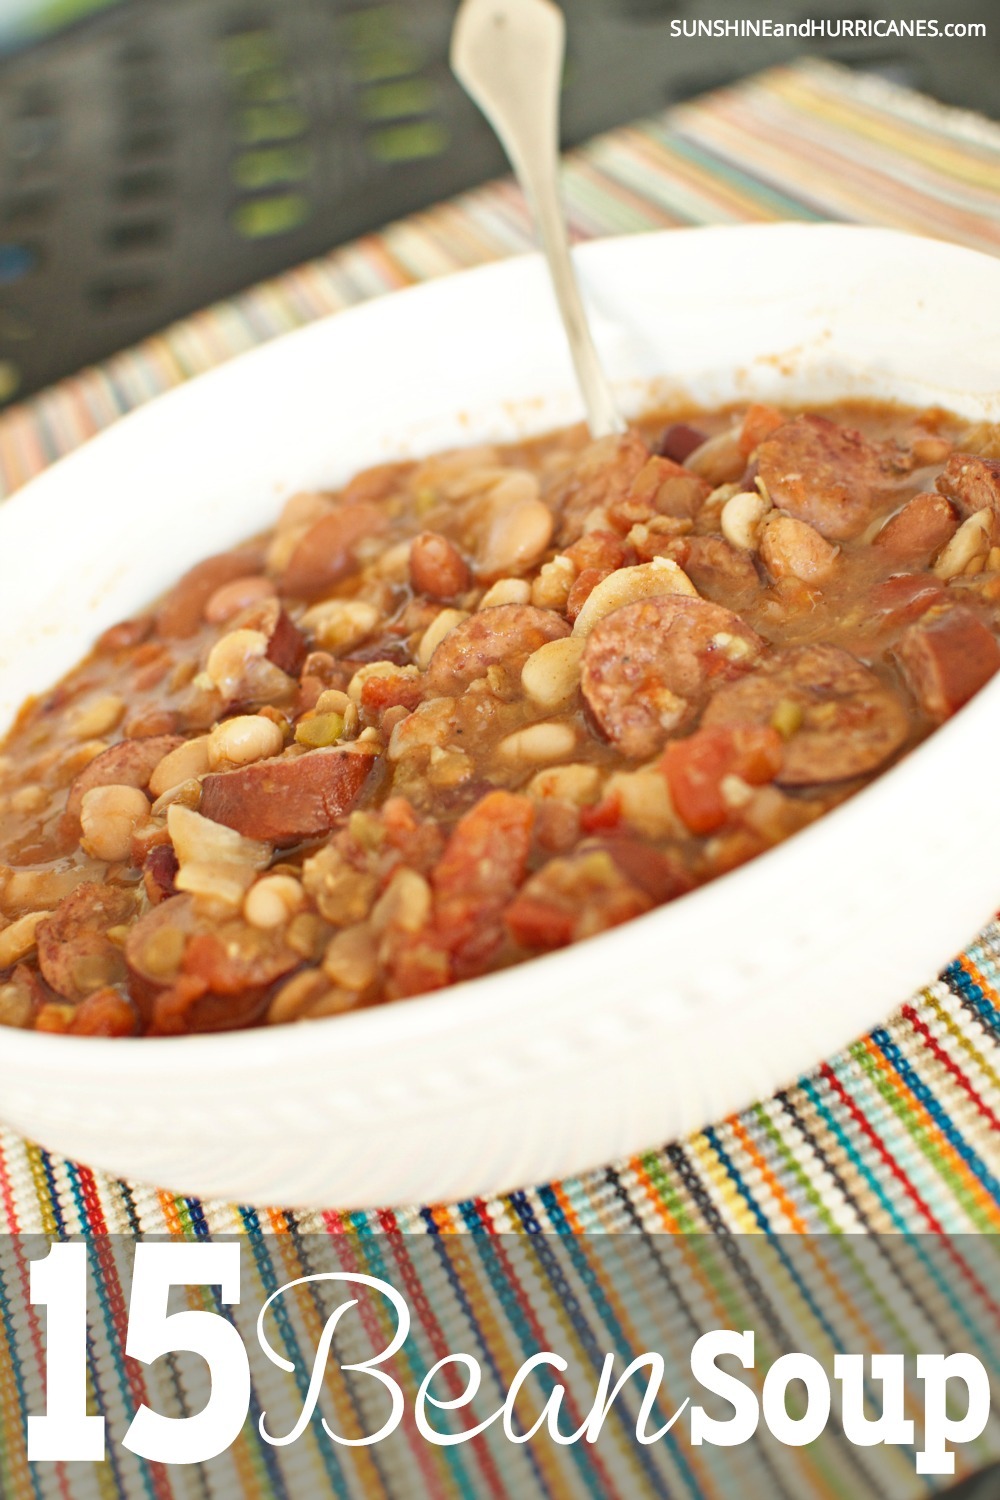 Looking for the perfect comfort food to feed your family on a chilly fall or winter day? This 15 bean soup recipe savory and delicious. An easy family meal with leftovers to freeze or use for school lunches. 15 bean soup. SunshineandHurricanes.com